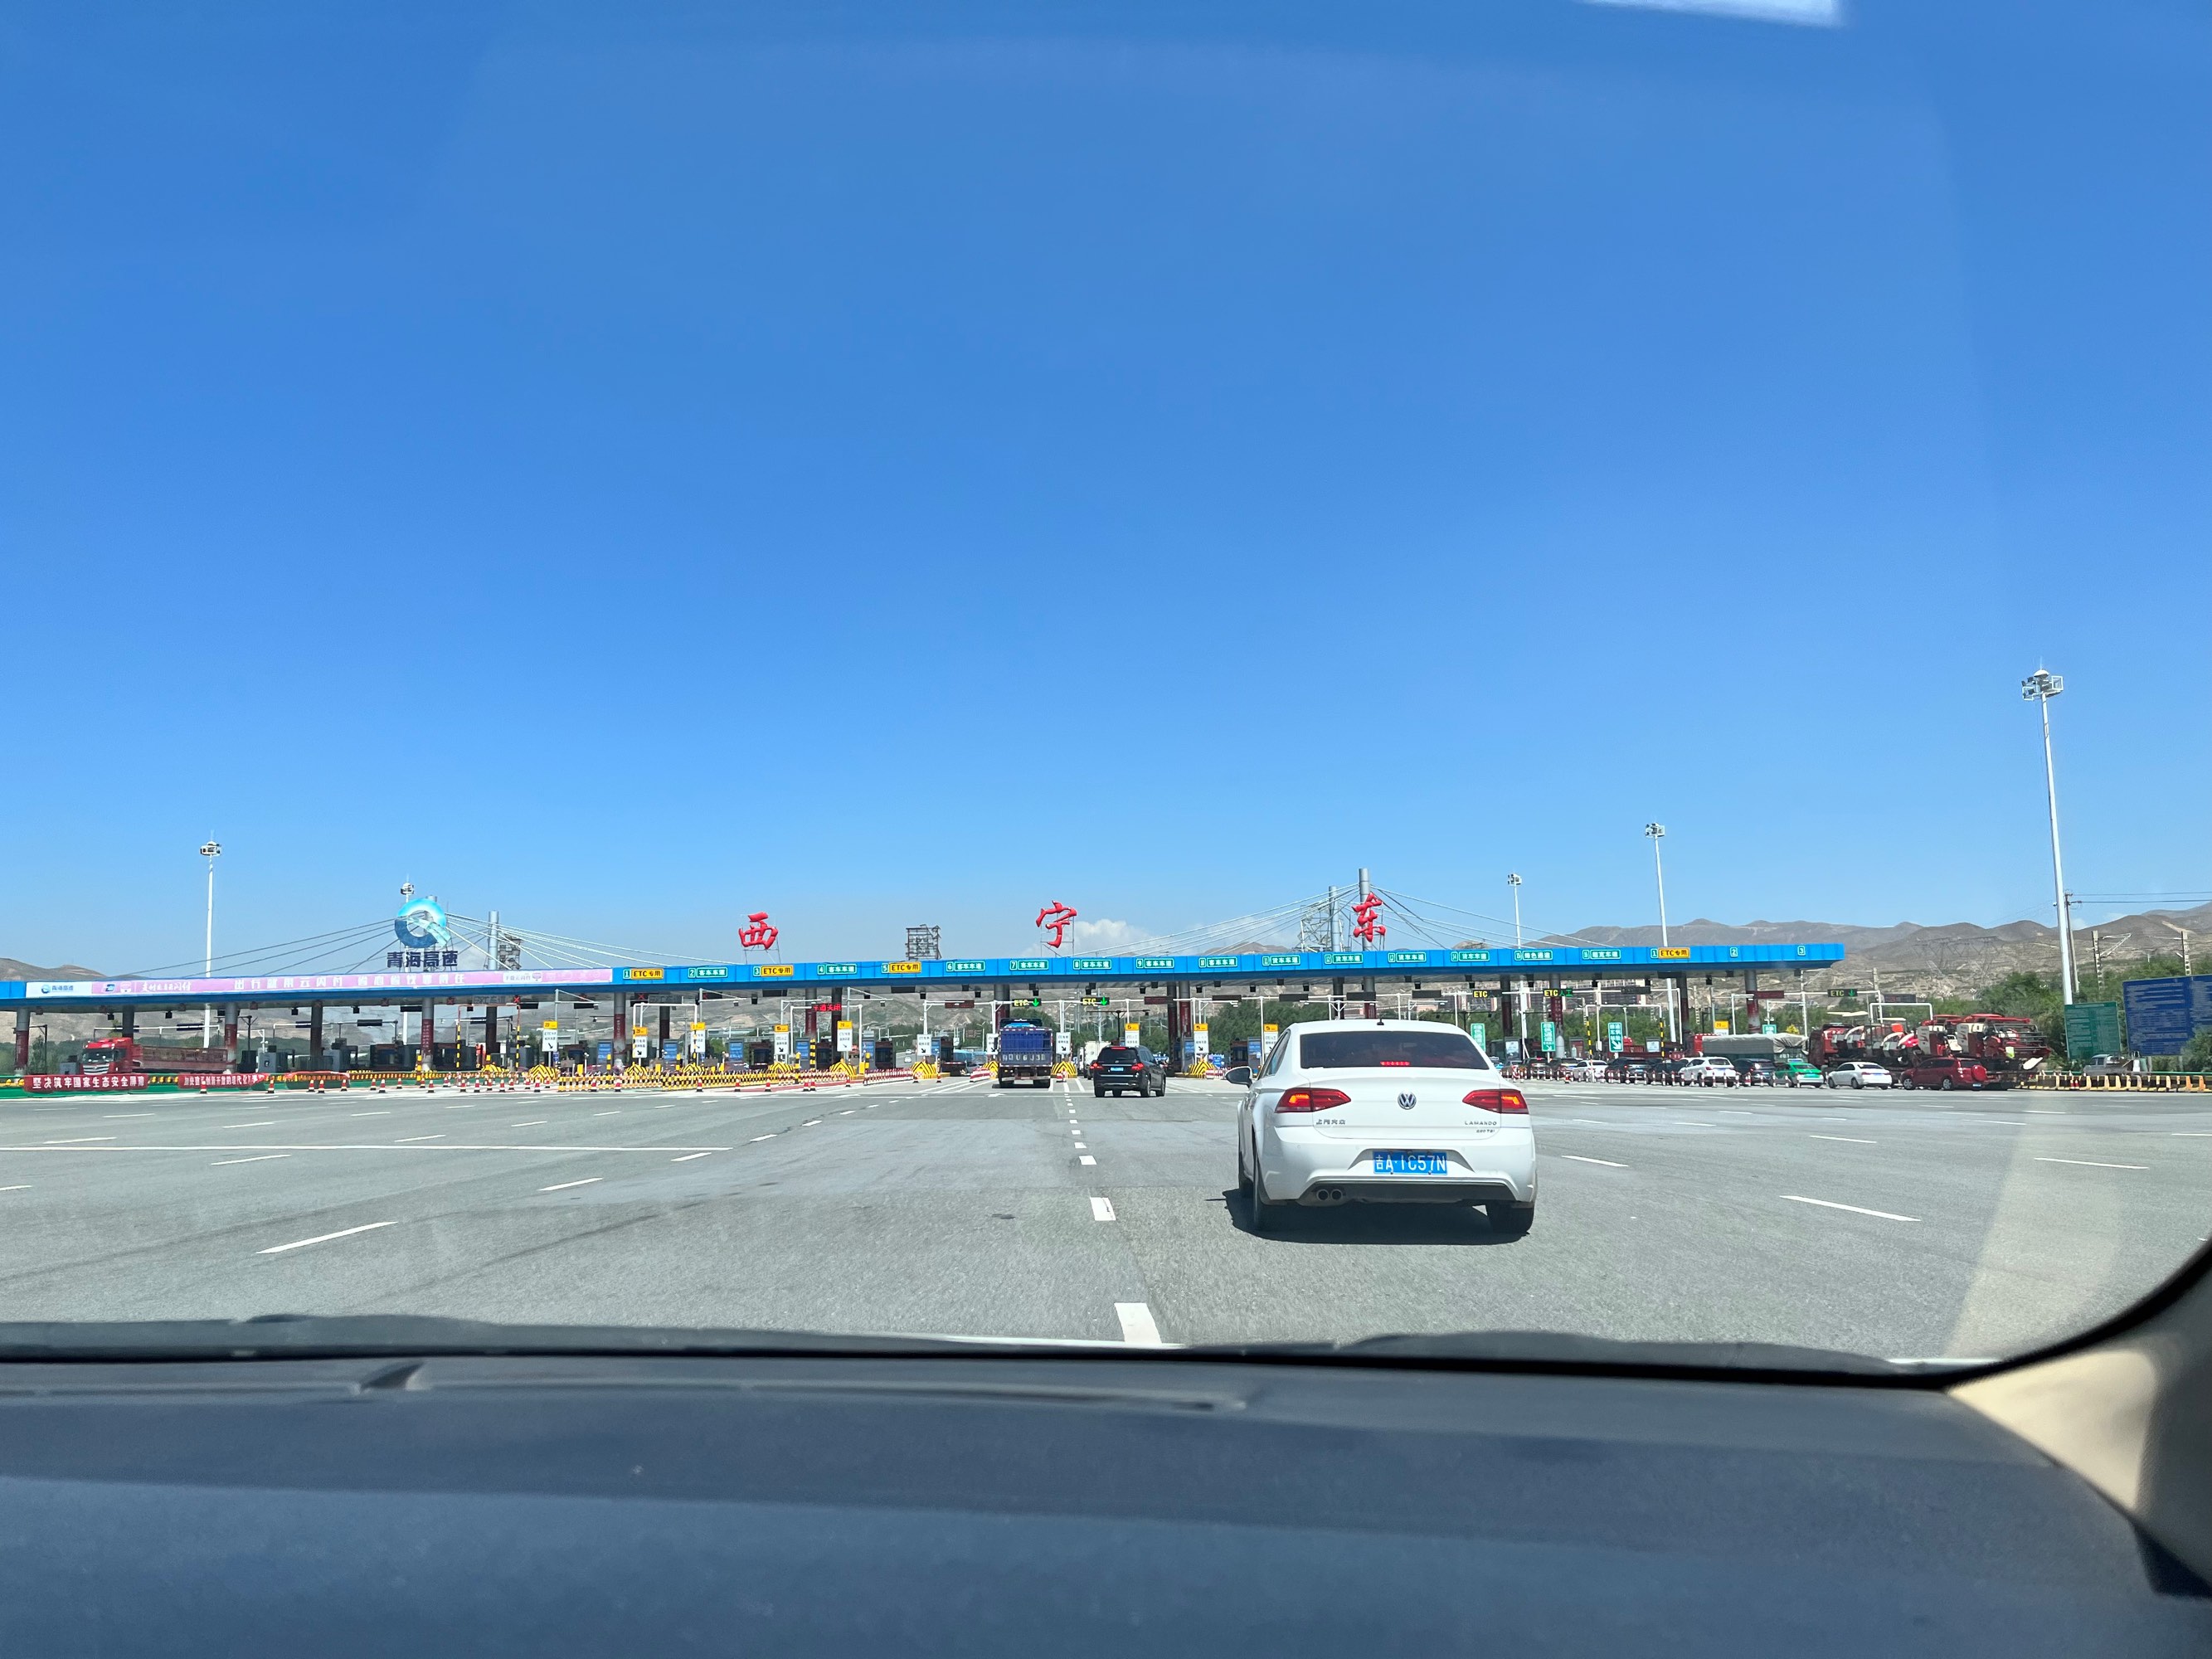 Entrance to the Xining Airport Expressway, where individuals with non-Xining license plates were required to undergo nucleic acid testing after passing the toll booth